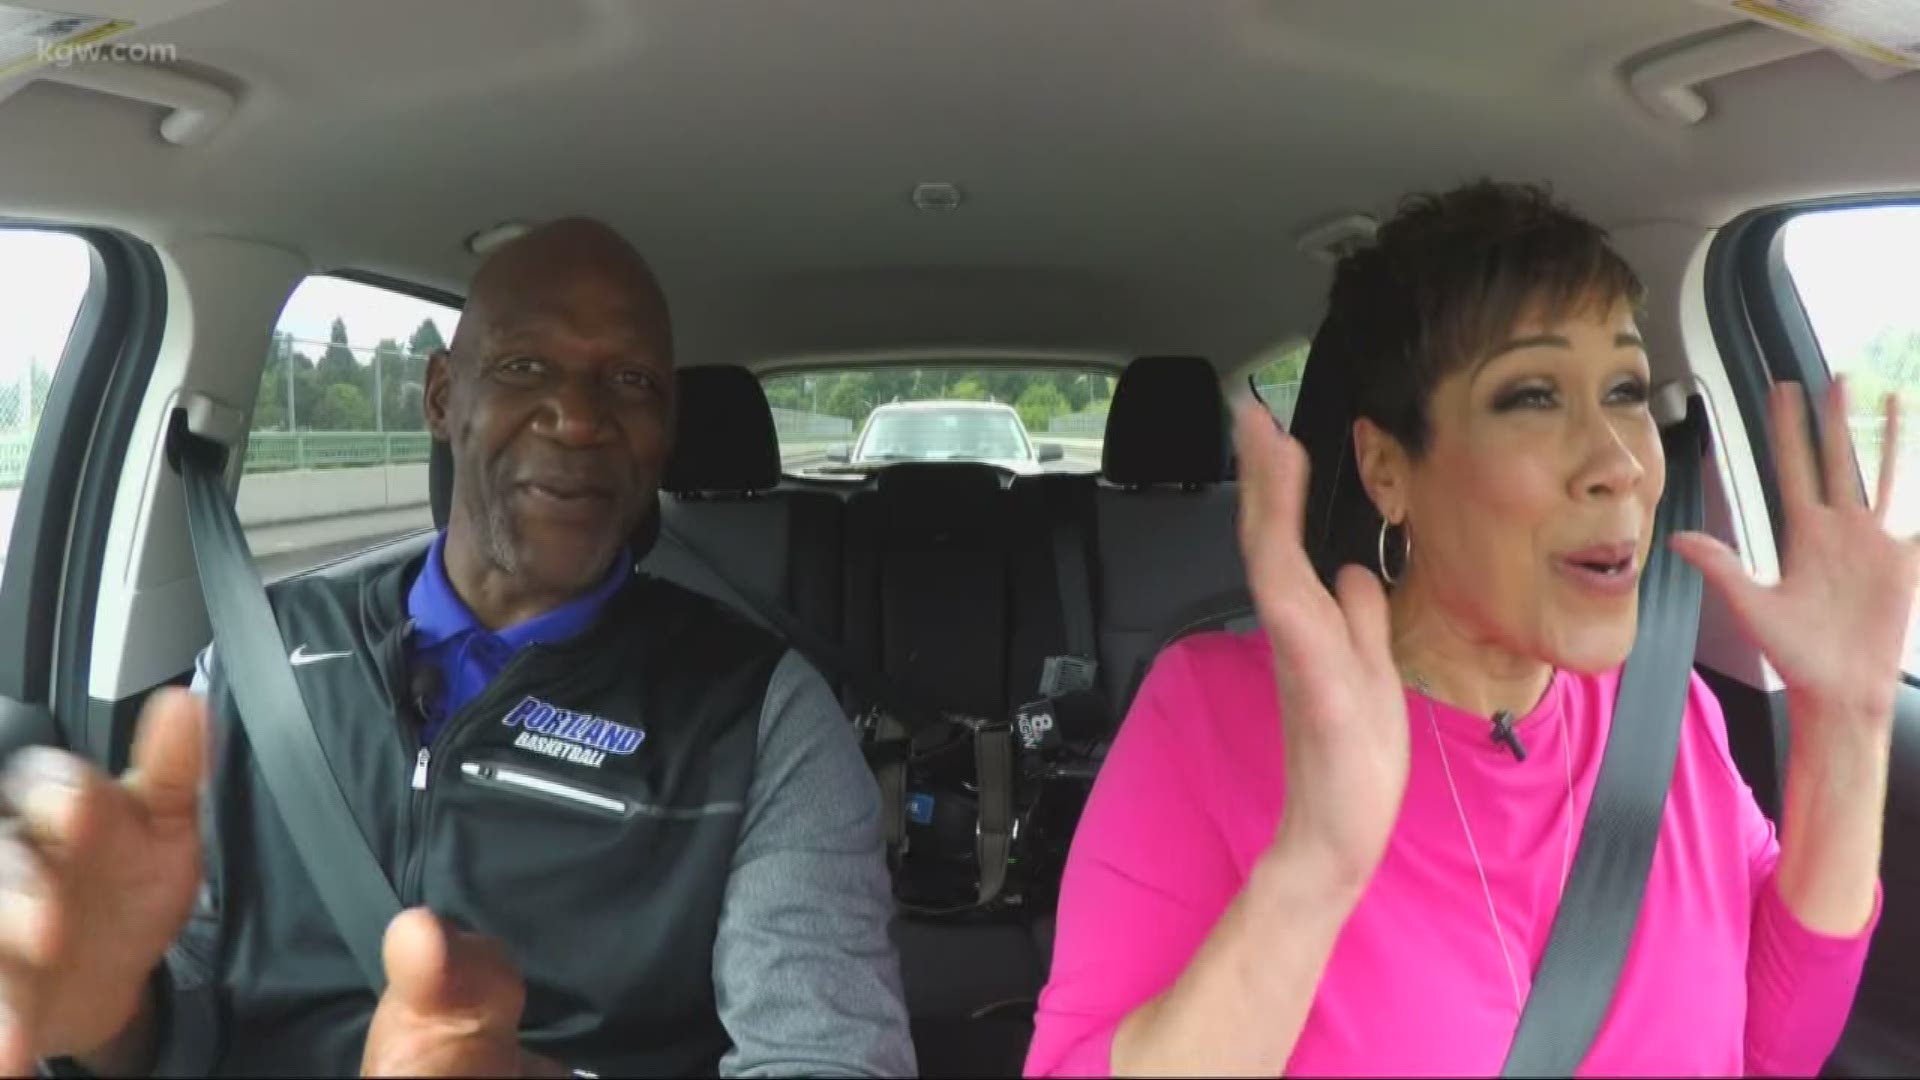 Sunrise anchor Brenda Braxton has the back story on her KGW Carpool interview with Terry Porter